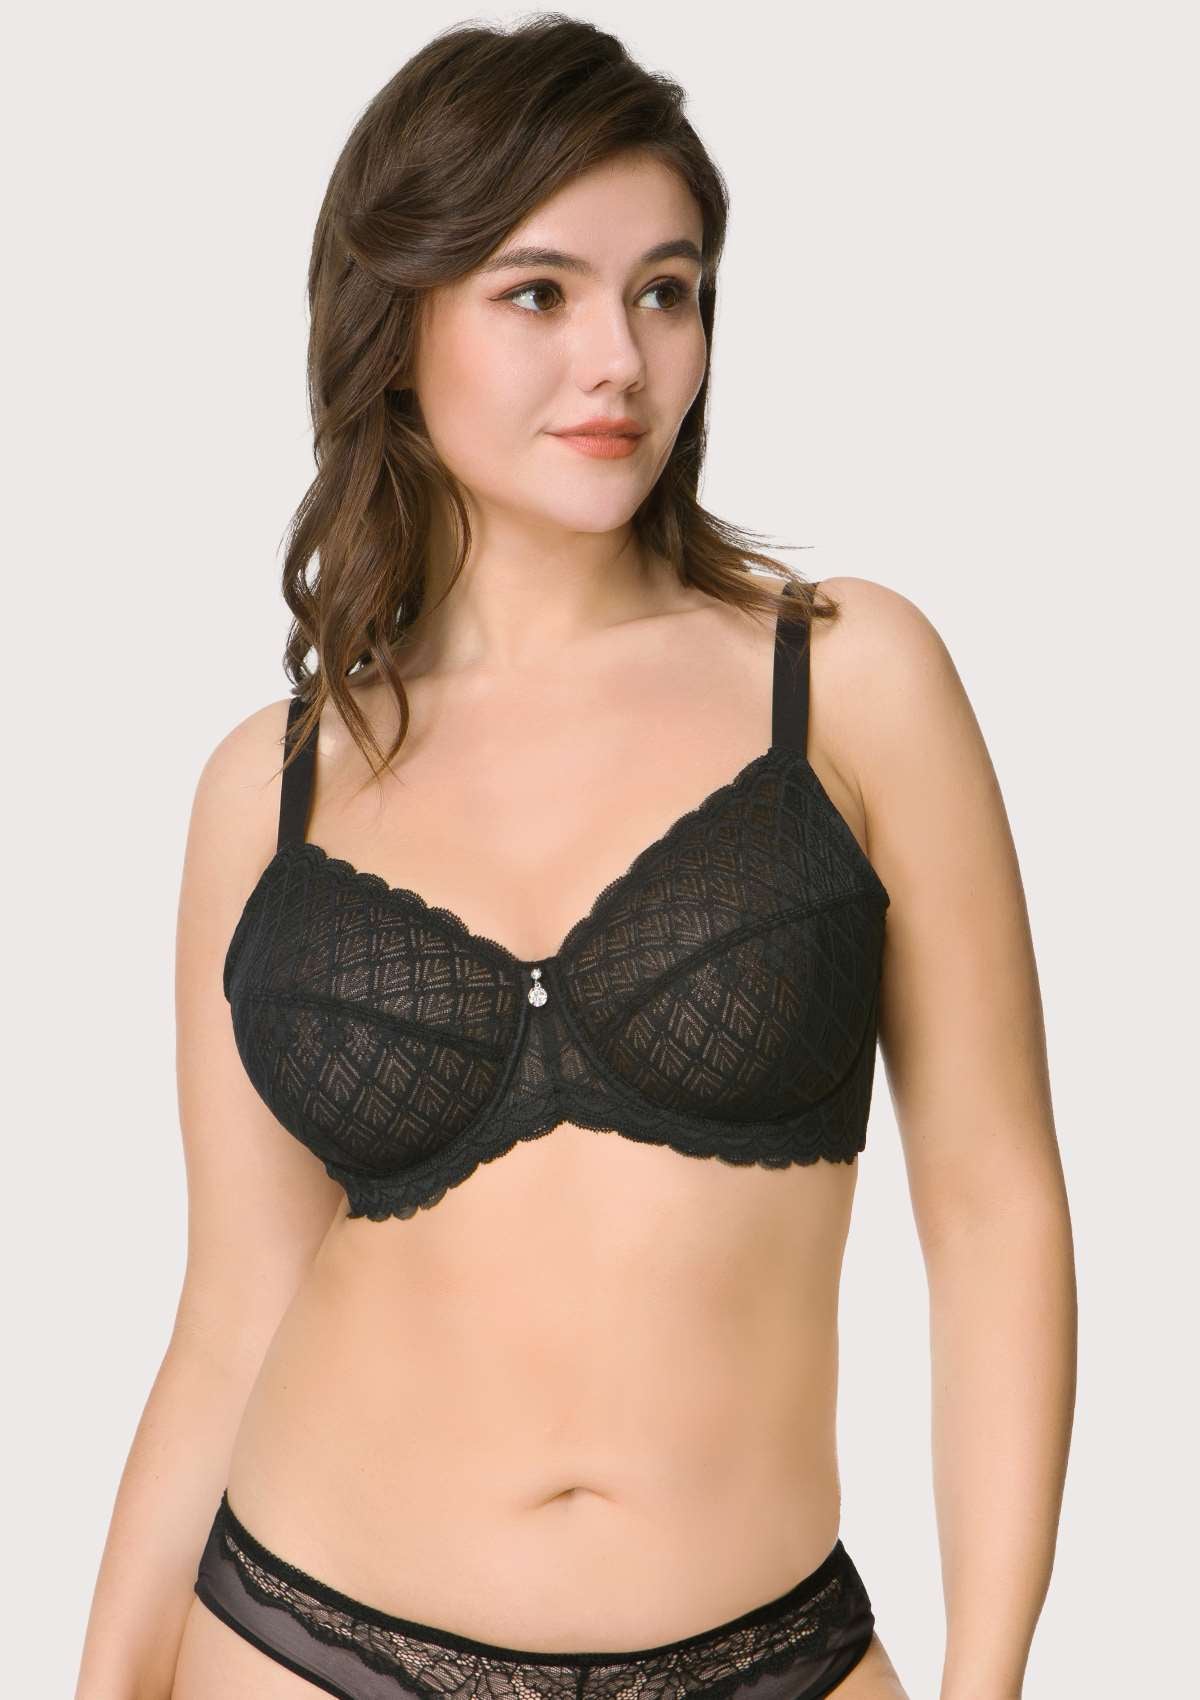 HSIA Plaid Full-Coverage Bra: Soft Bra With Thick Straps - Light Pink / 34 / C